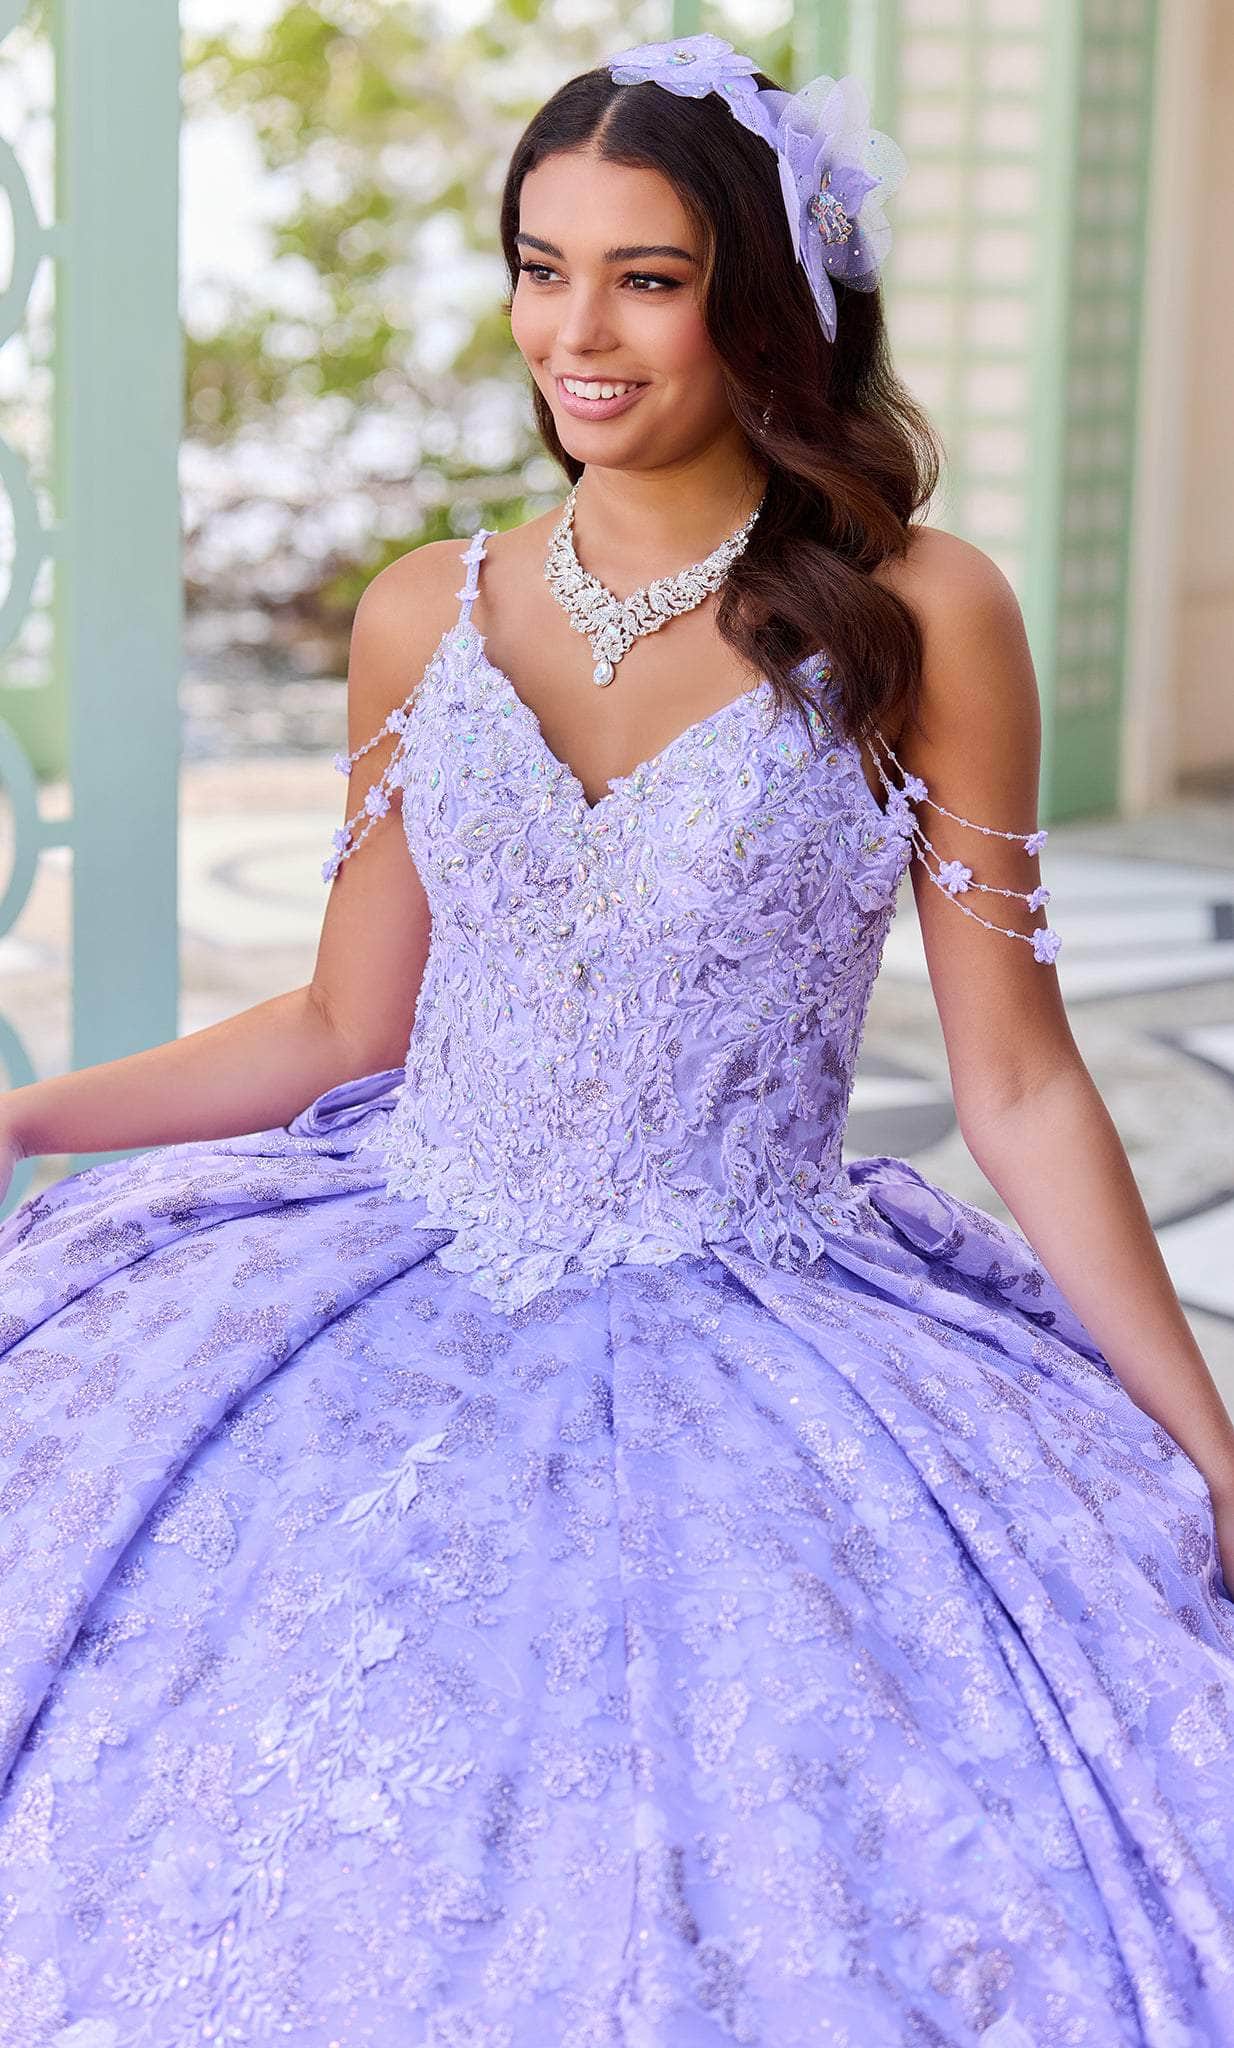 Lilac Lavender Mermaid Aso Ebi Lavender Evening Gown With Sheer Neckline,  Beaded Sequins, And Garter Skirt For Black Couple Prom From Alegant_lady,  $165.42 | DHgate.Com